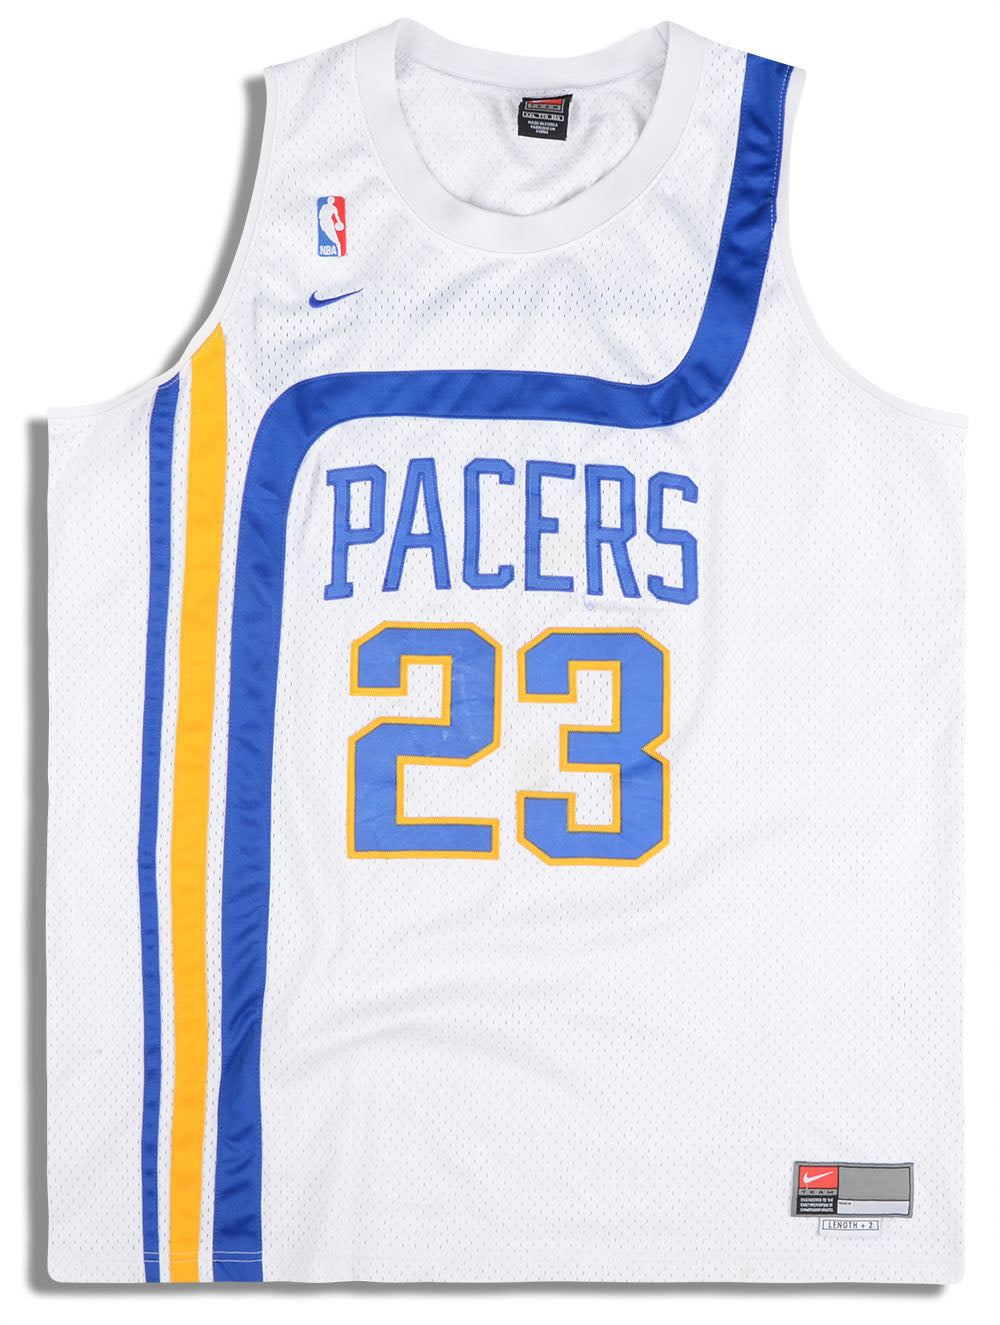 indiana pacers retro jersey